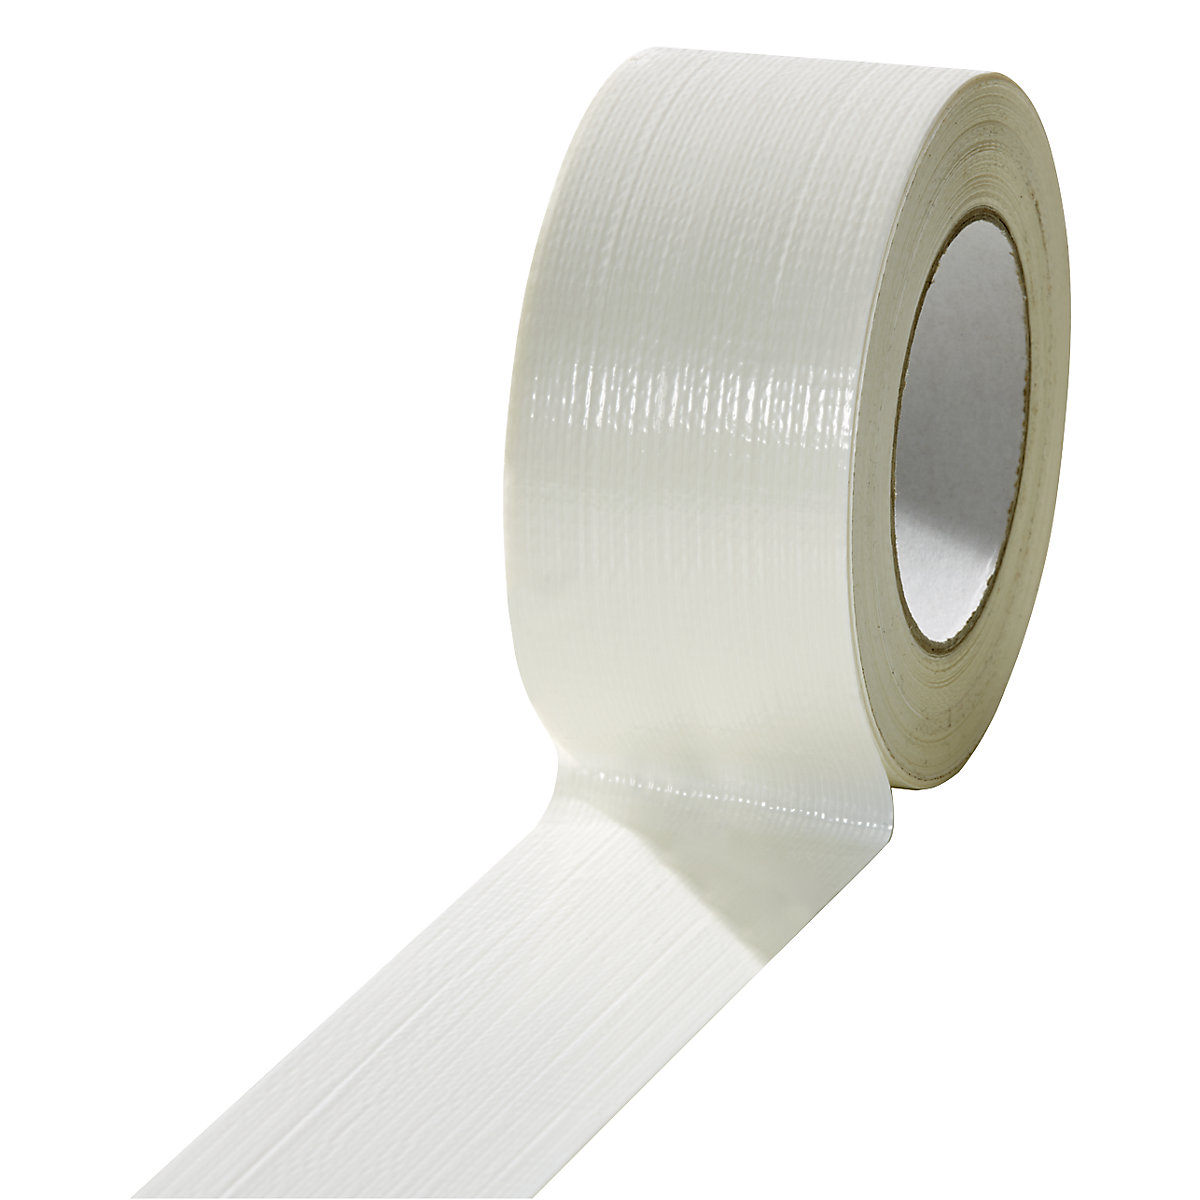 Fabric tape, in different colours, pack of 18 rolls, white, tape width 50 mm-12